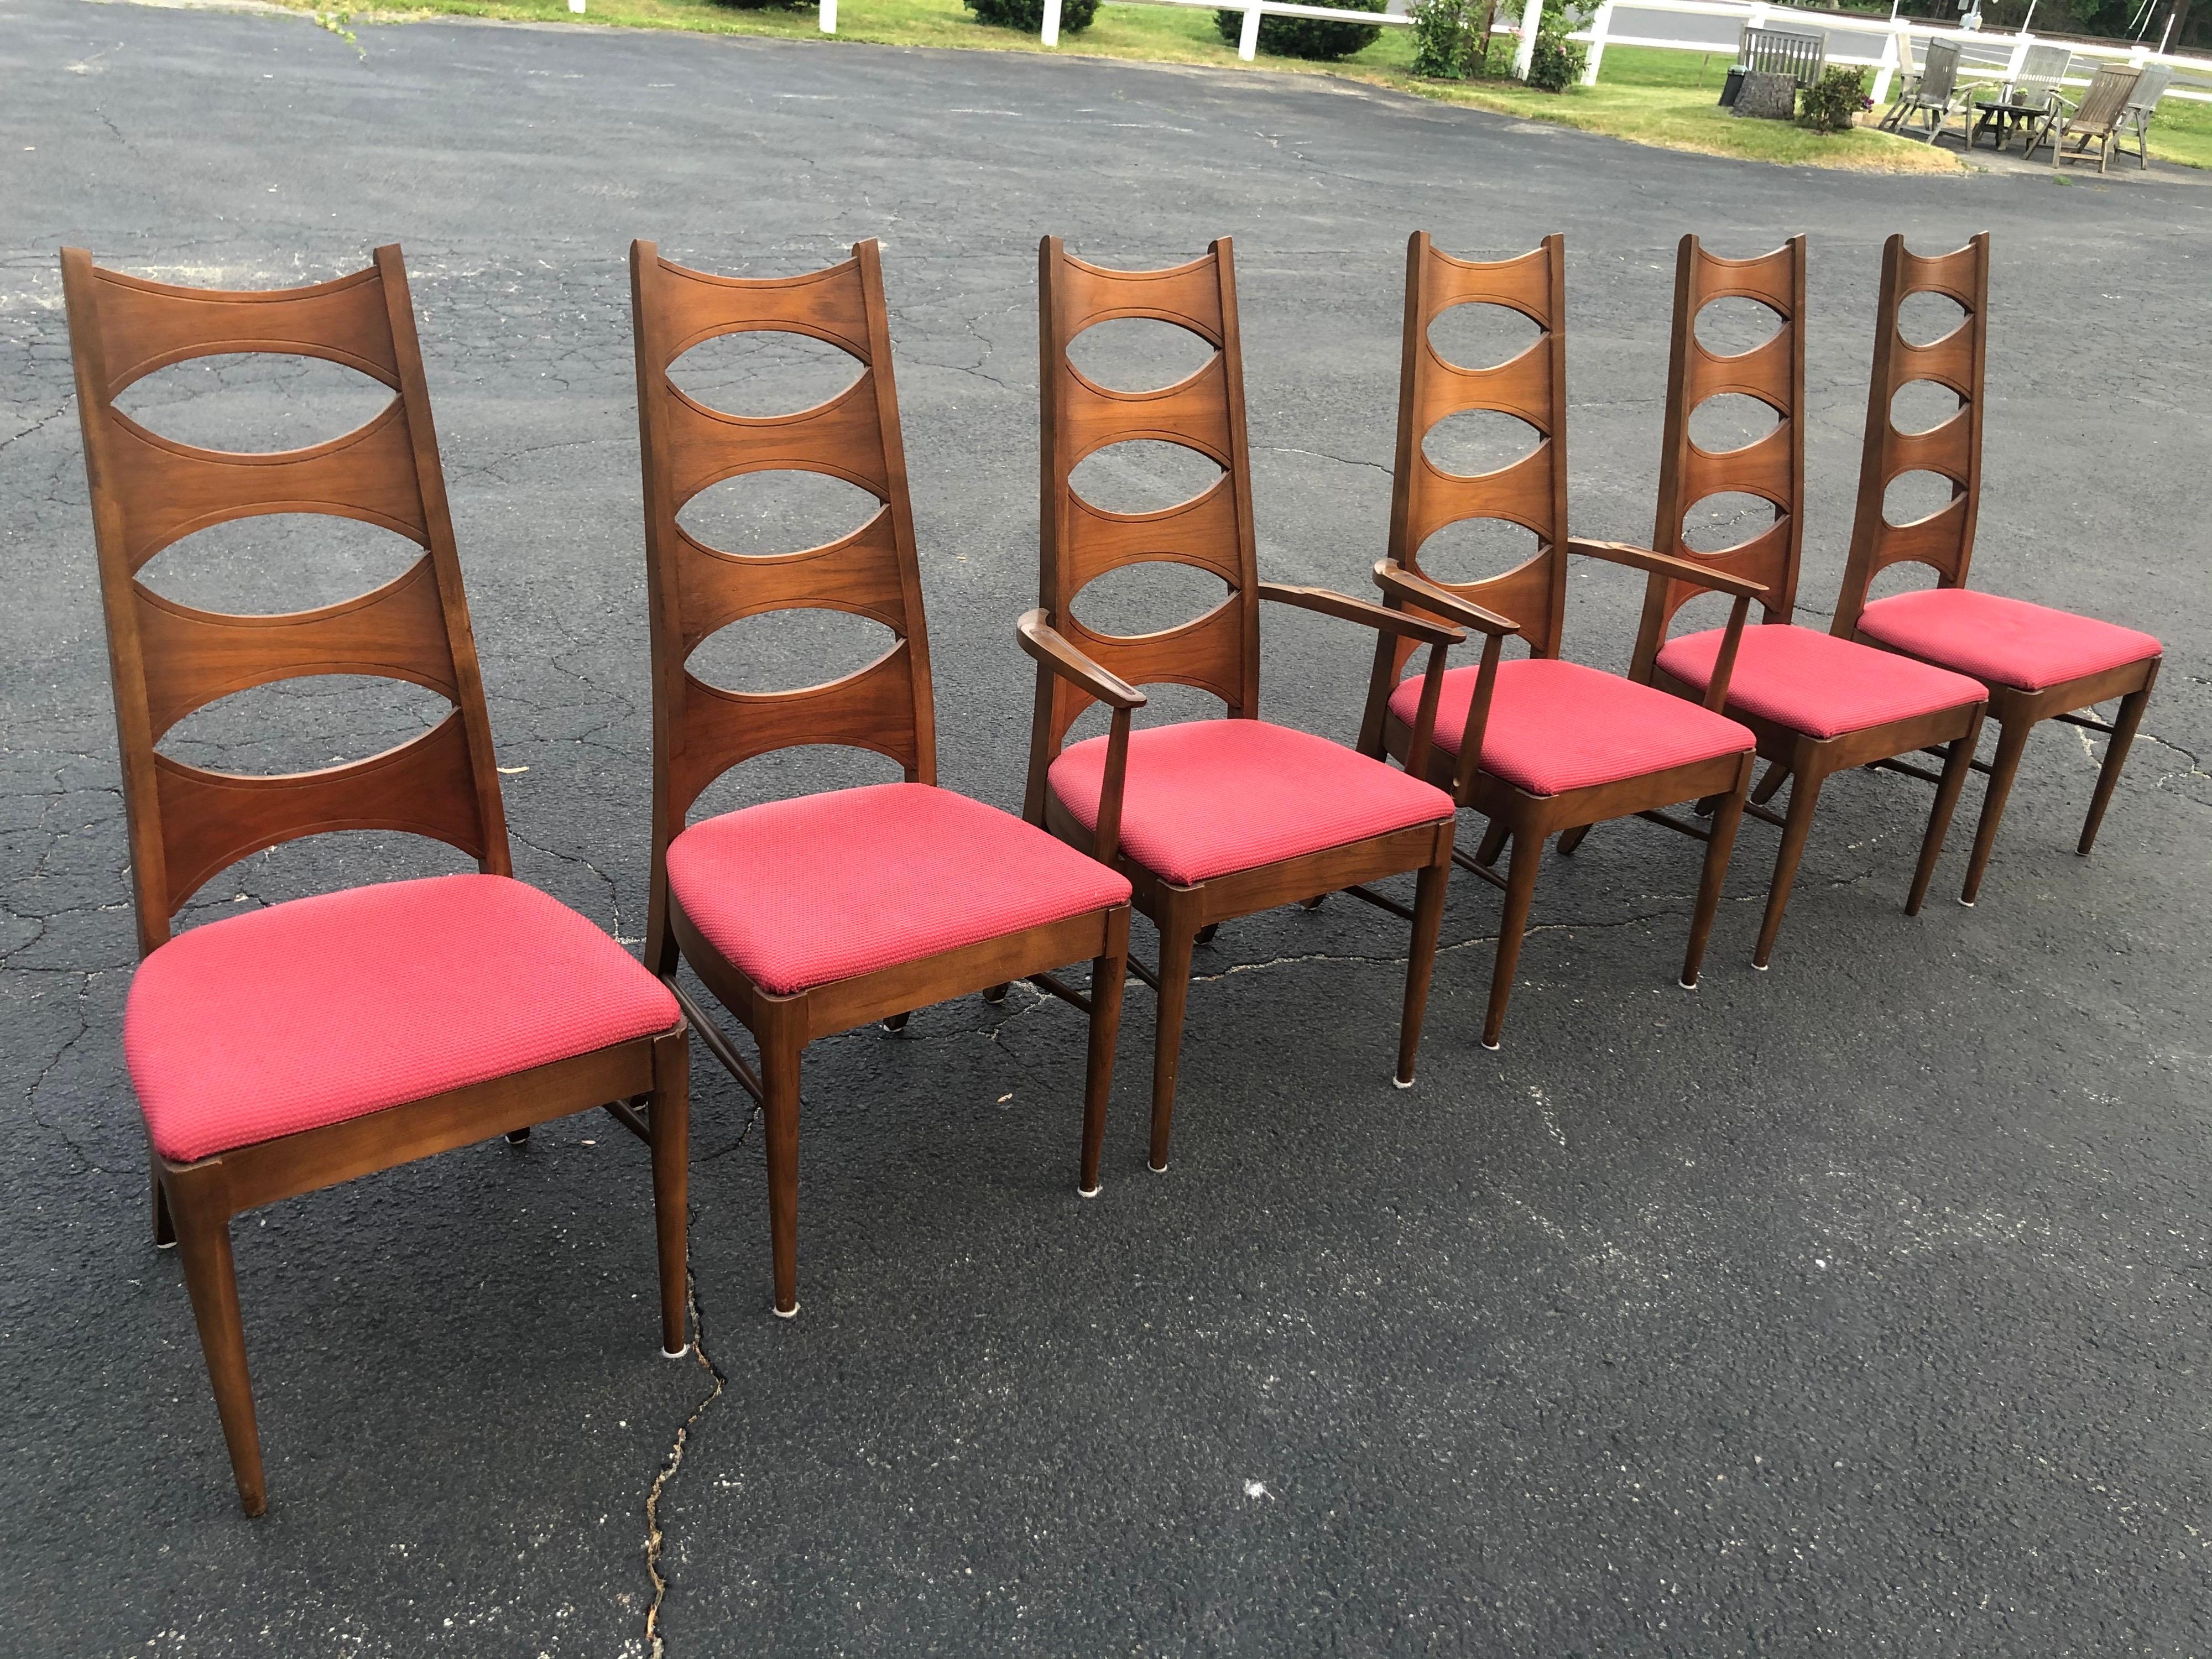 Set of 6 mid century walnut dining chairs by Kent Coffey. Rare set of his Perspecta Collection. Fabulous brutalist style and shape. 2 arm chairs and six side chairs. Sturdy and comfortable. Seats are covered in a berry colored sturday cotton fabric.